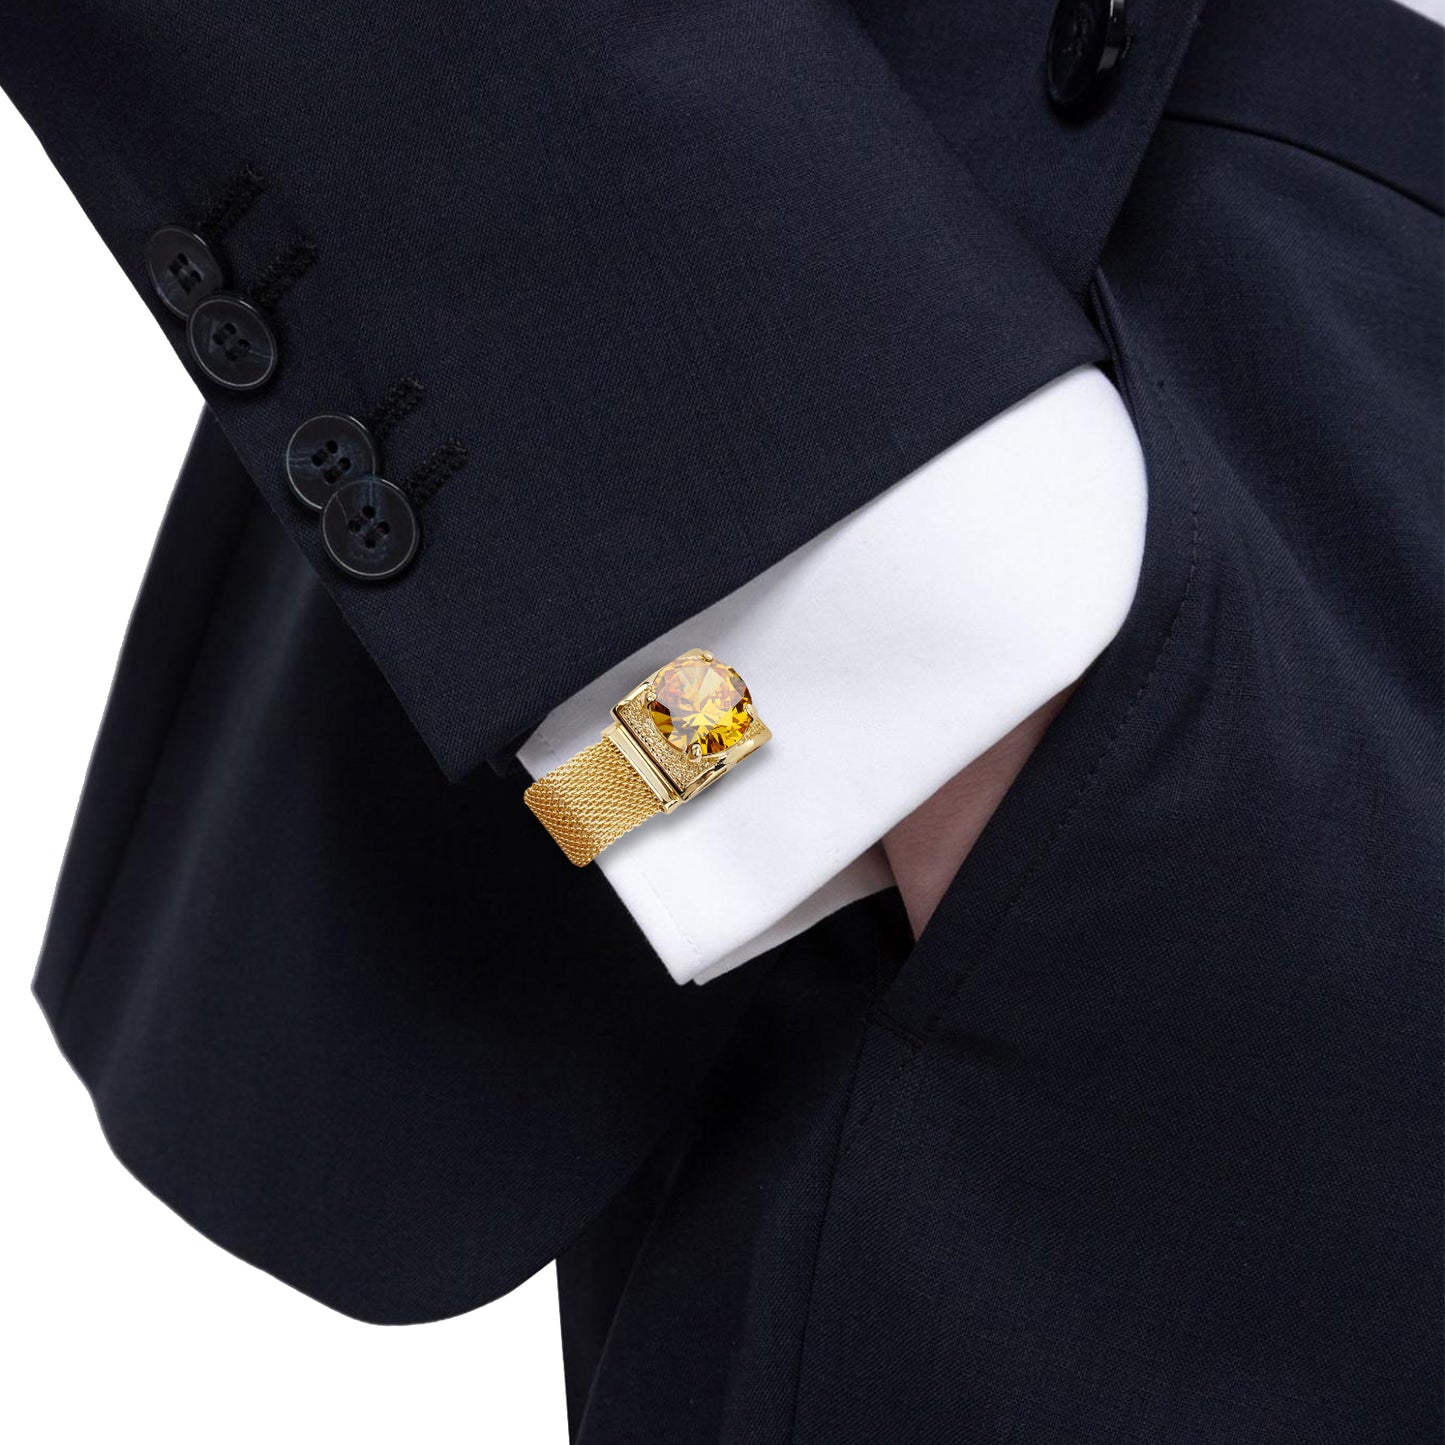 Cufflinks for Men with Chain - Birthstone and Shiny Gold Tone Shirt Accessories - Birthday Christmas Gifts for Men.